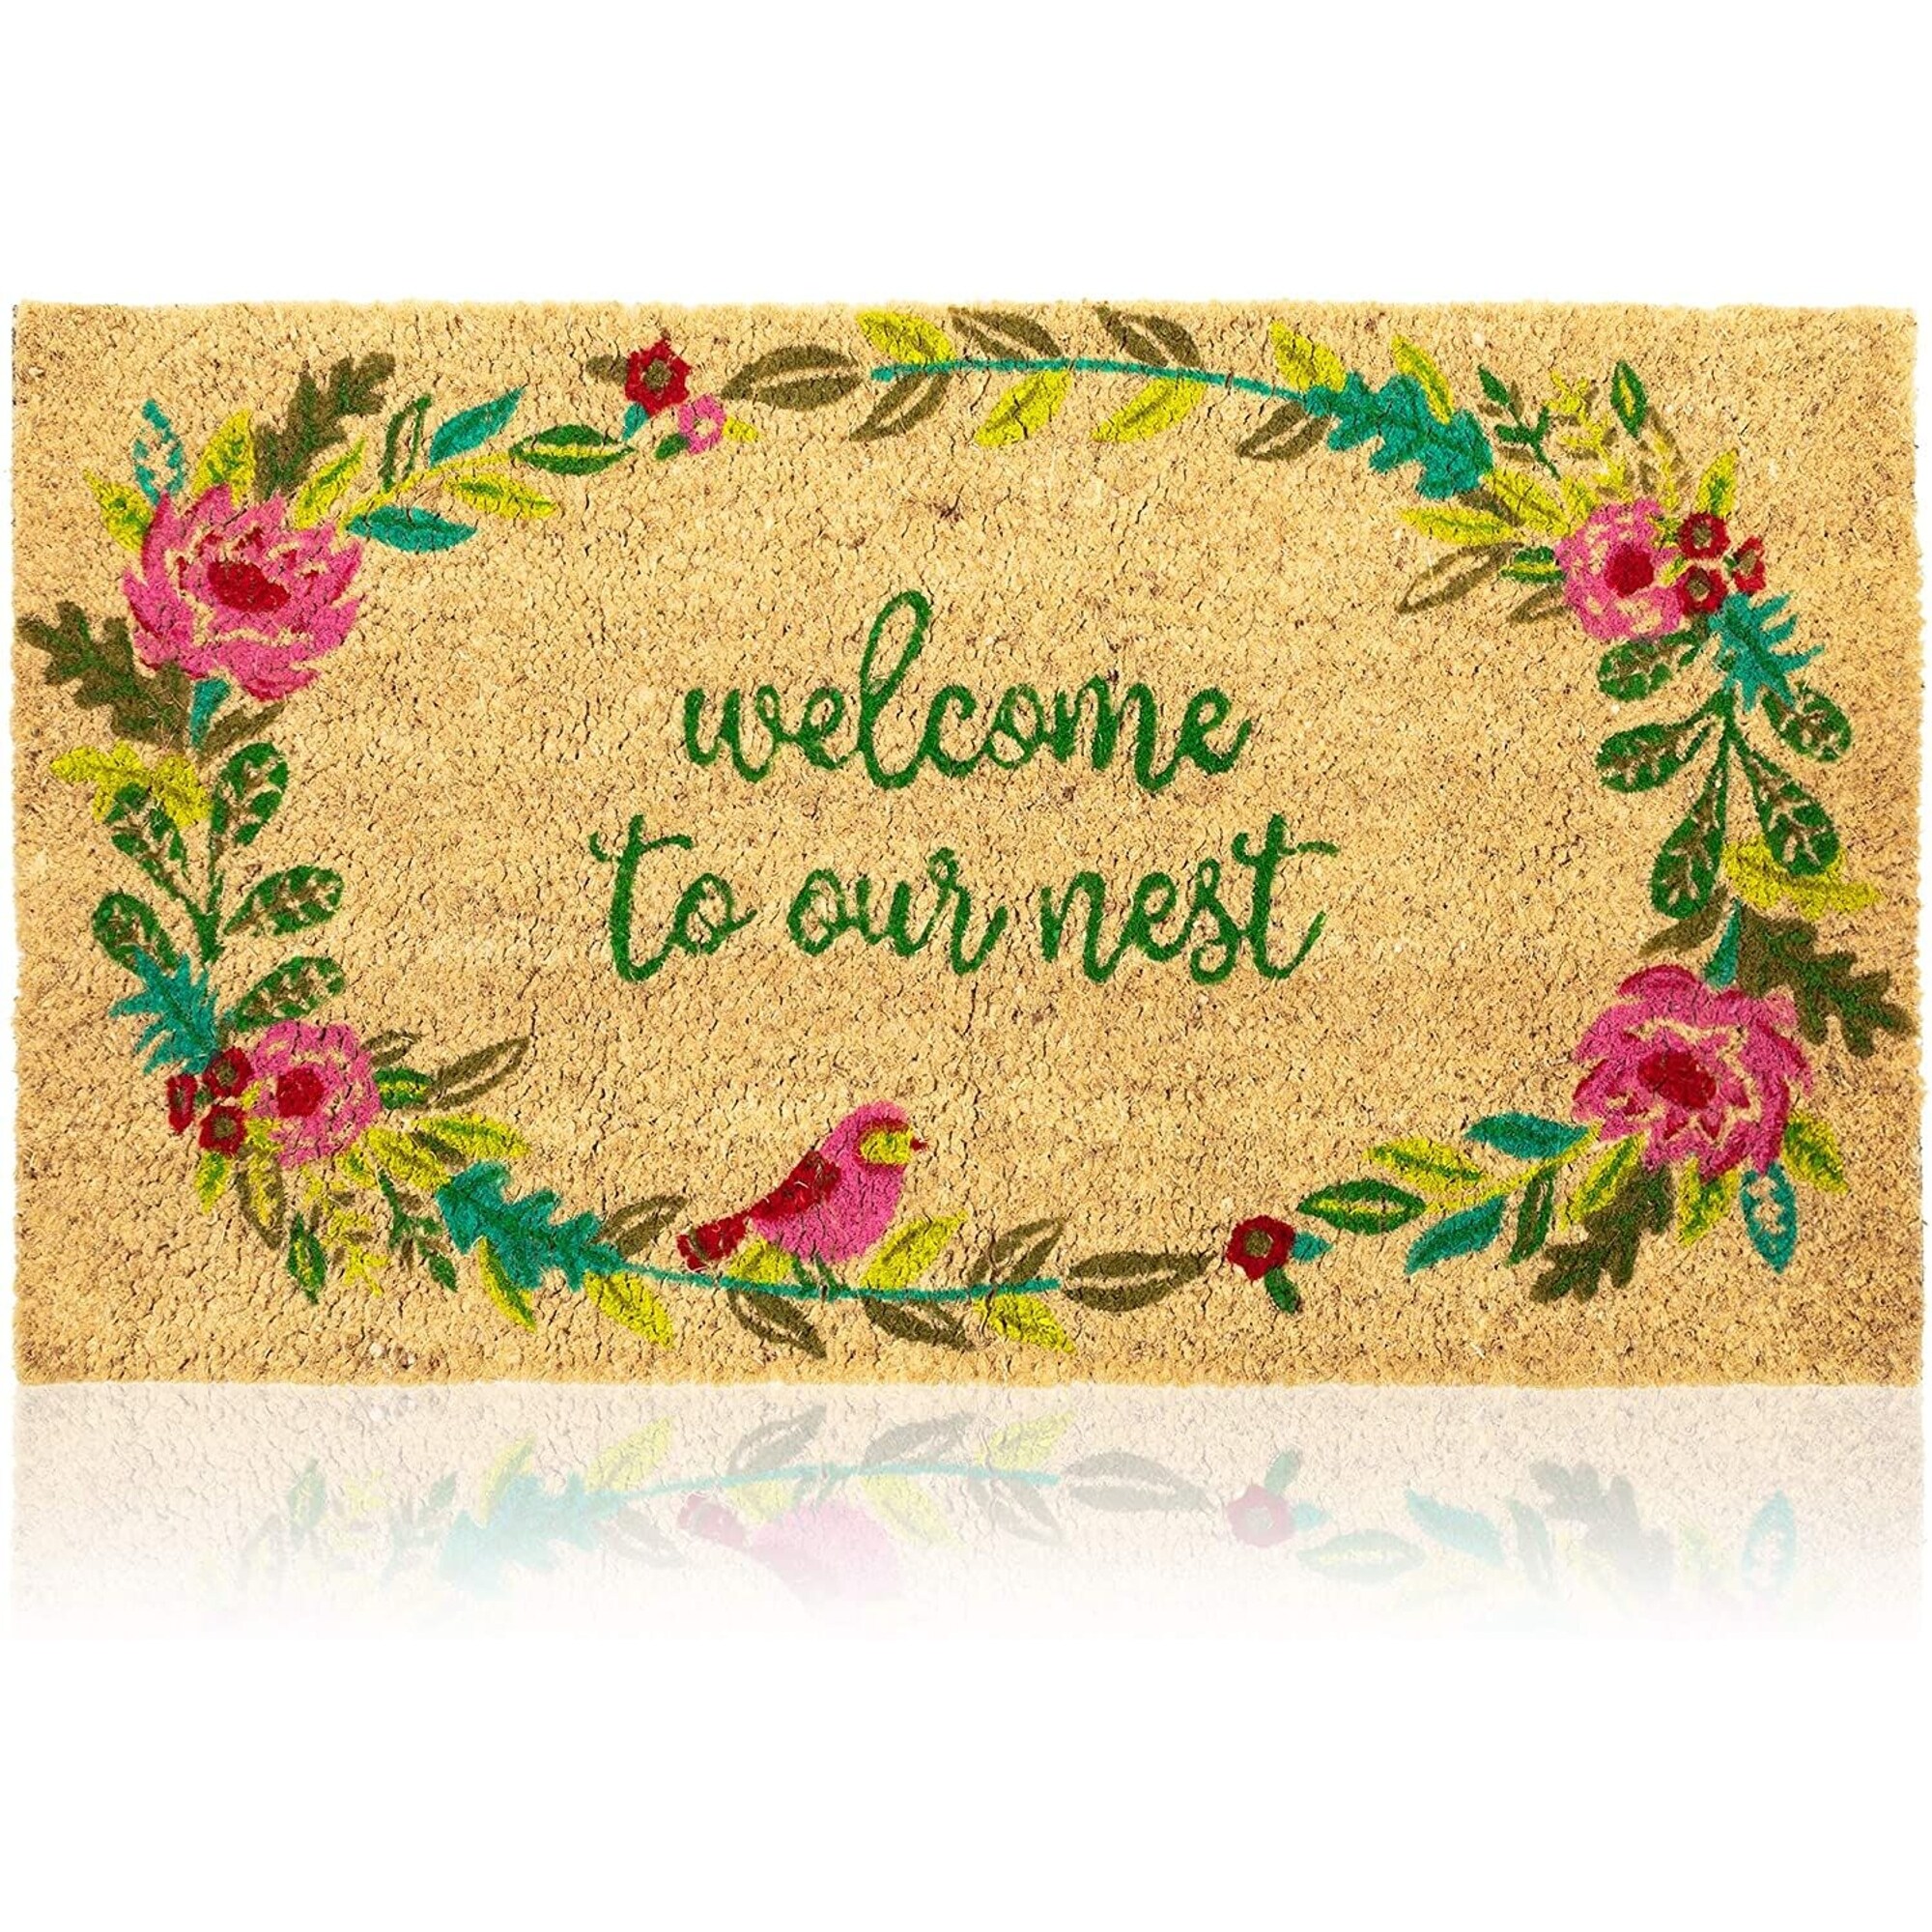 https://ak1.ostkcdn.com/images/products/is/images/direct/8838e0a8b6fa4038552469b20bbf48dbc82d3fb8/Natural-Coir-Doormat%2C-Welcome-to-Our-Nest-Mat-%2830-x-17-in%29.jpg